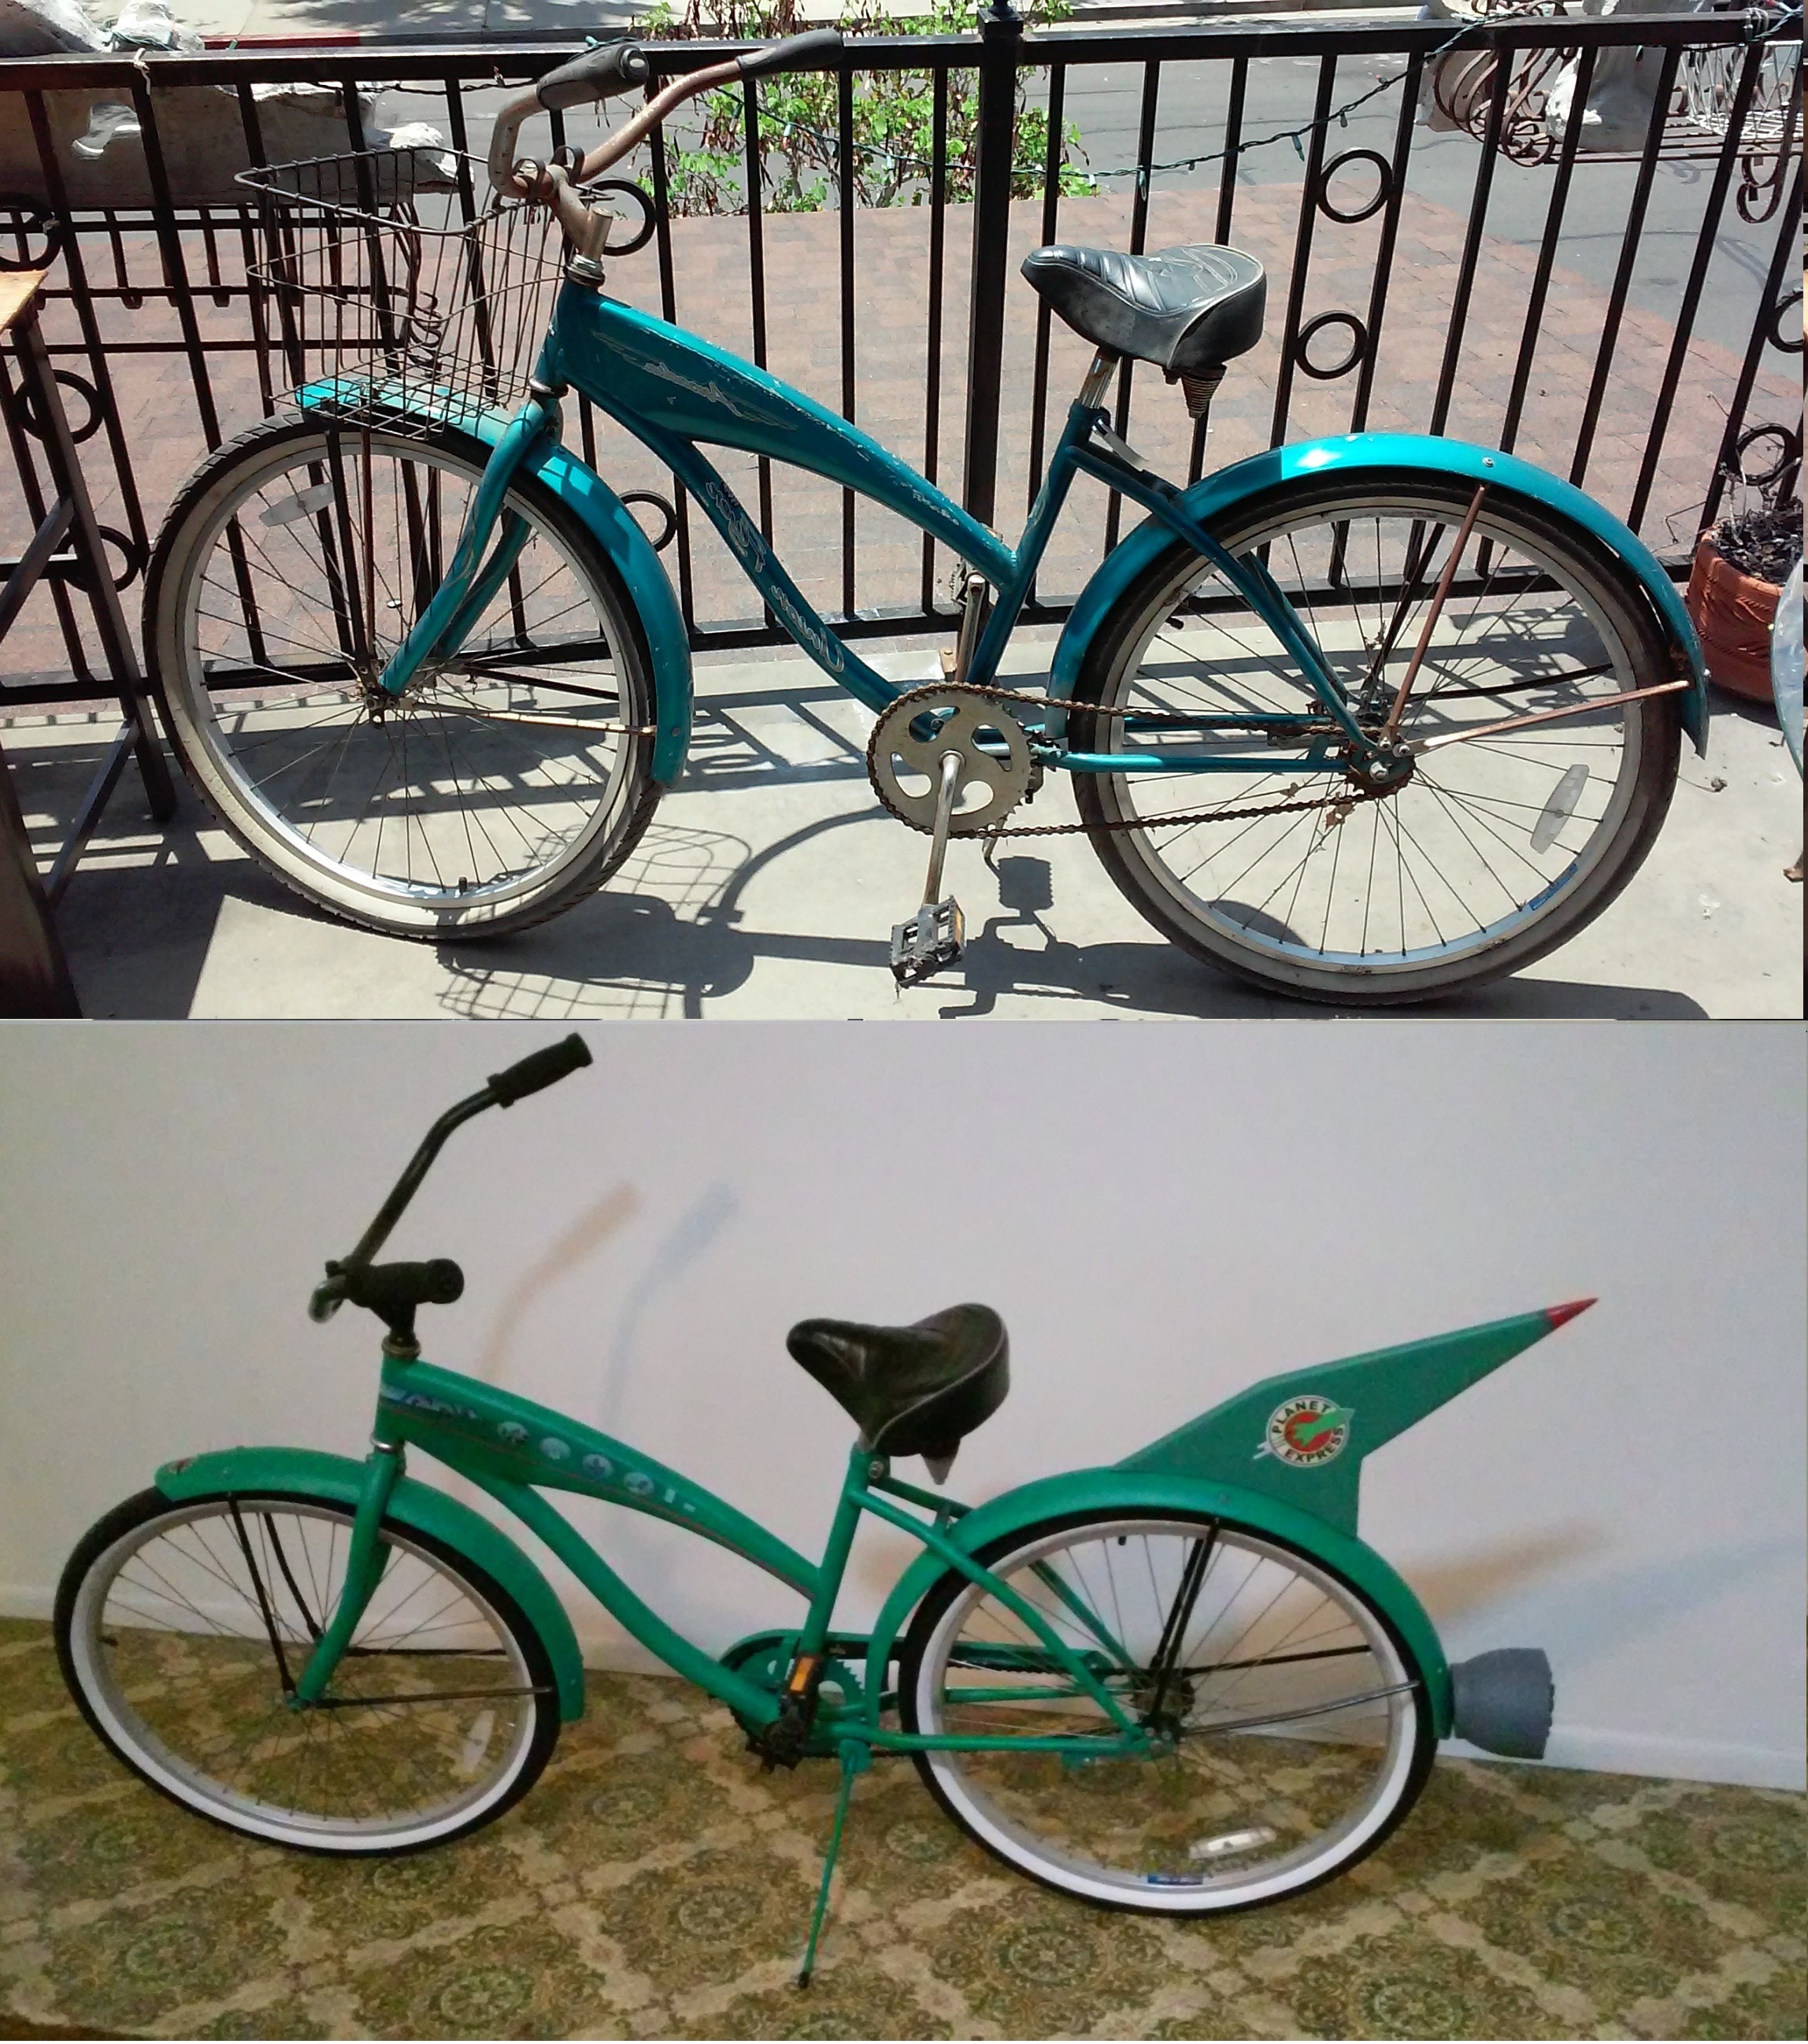 Found a beat up bike at the thrift store and gave it a makeover.